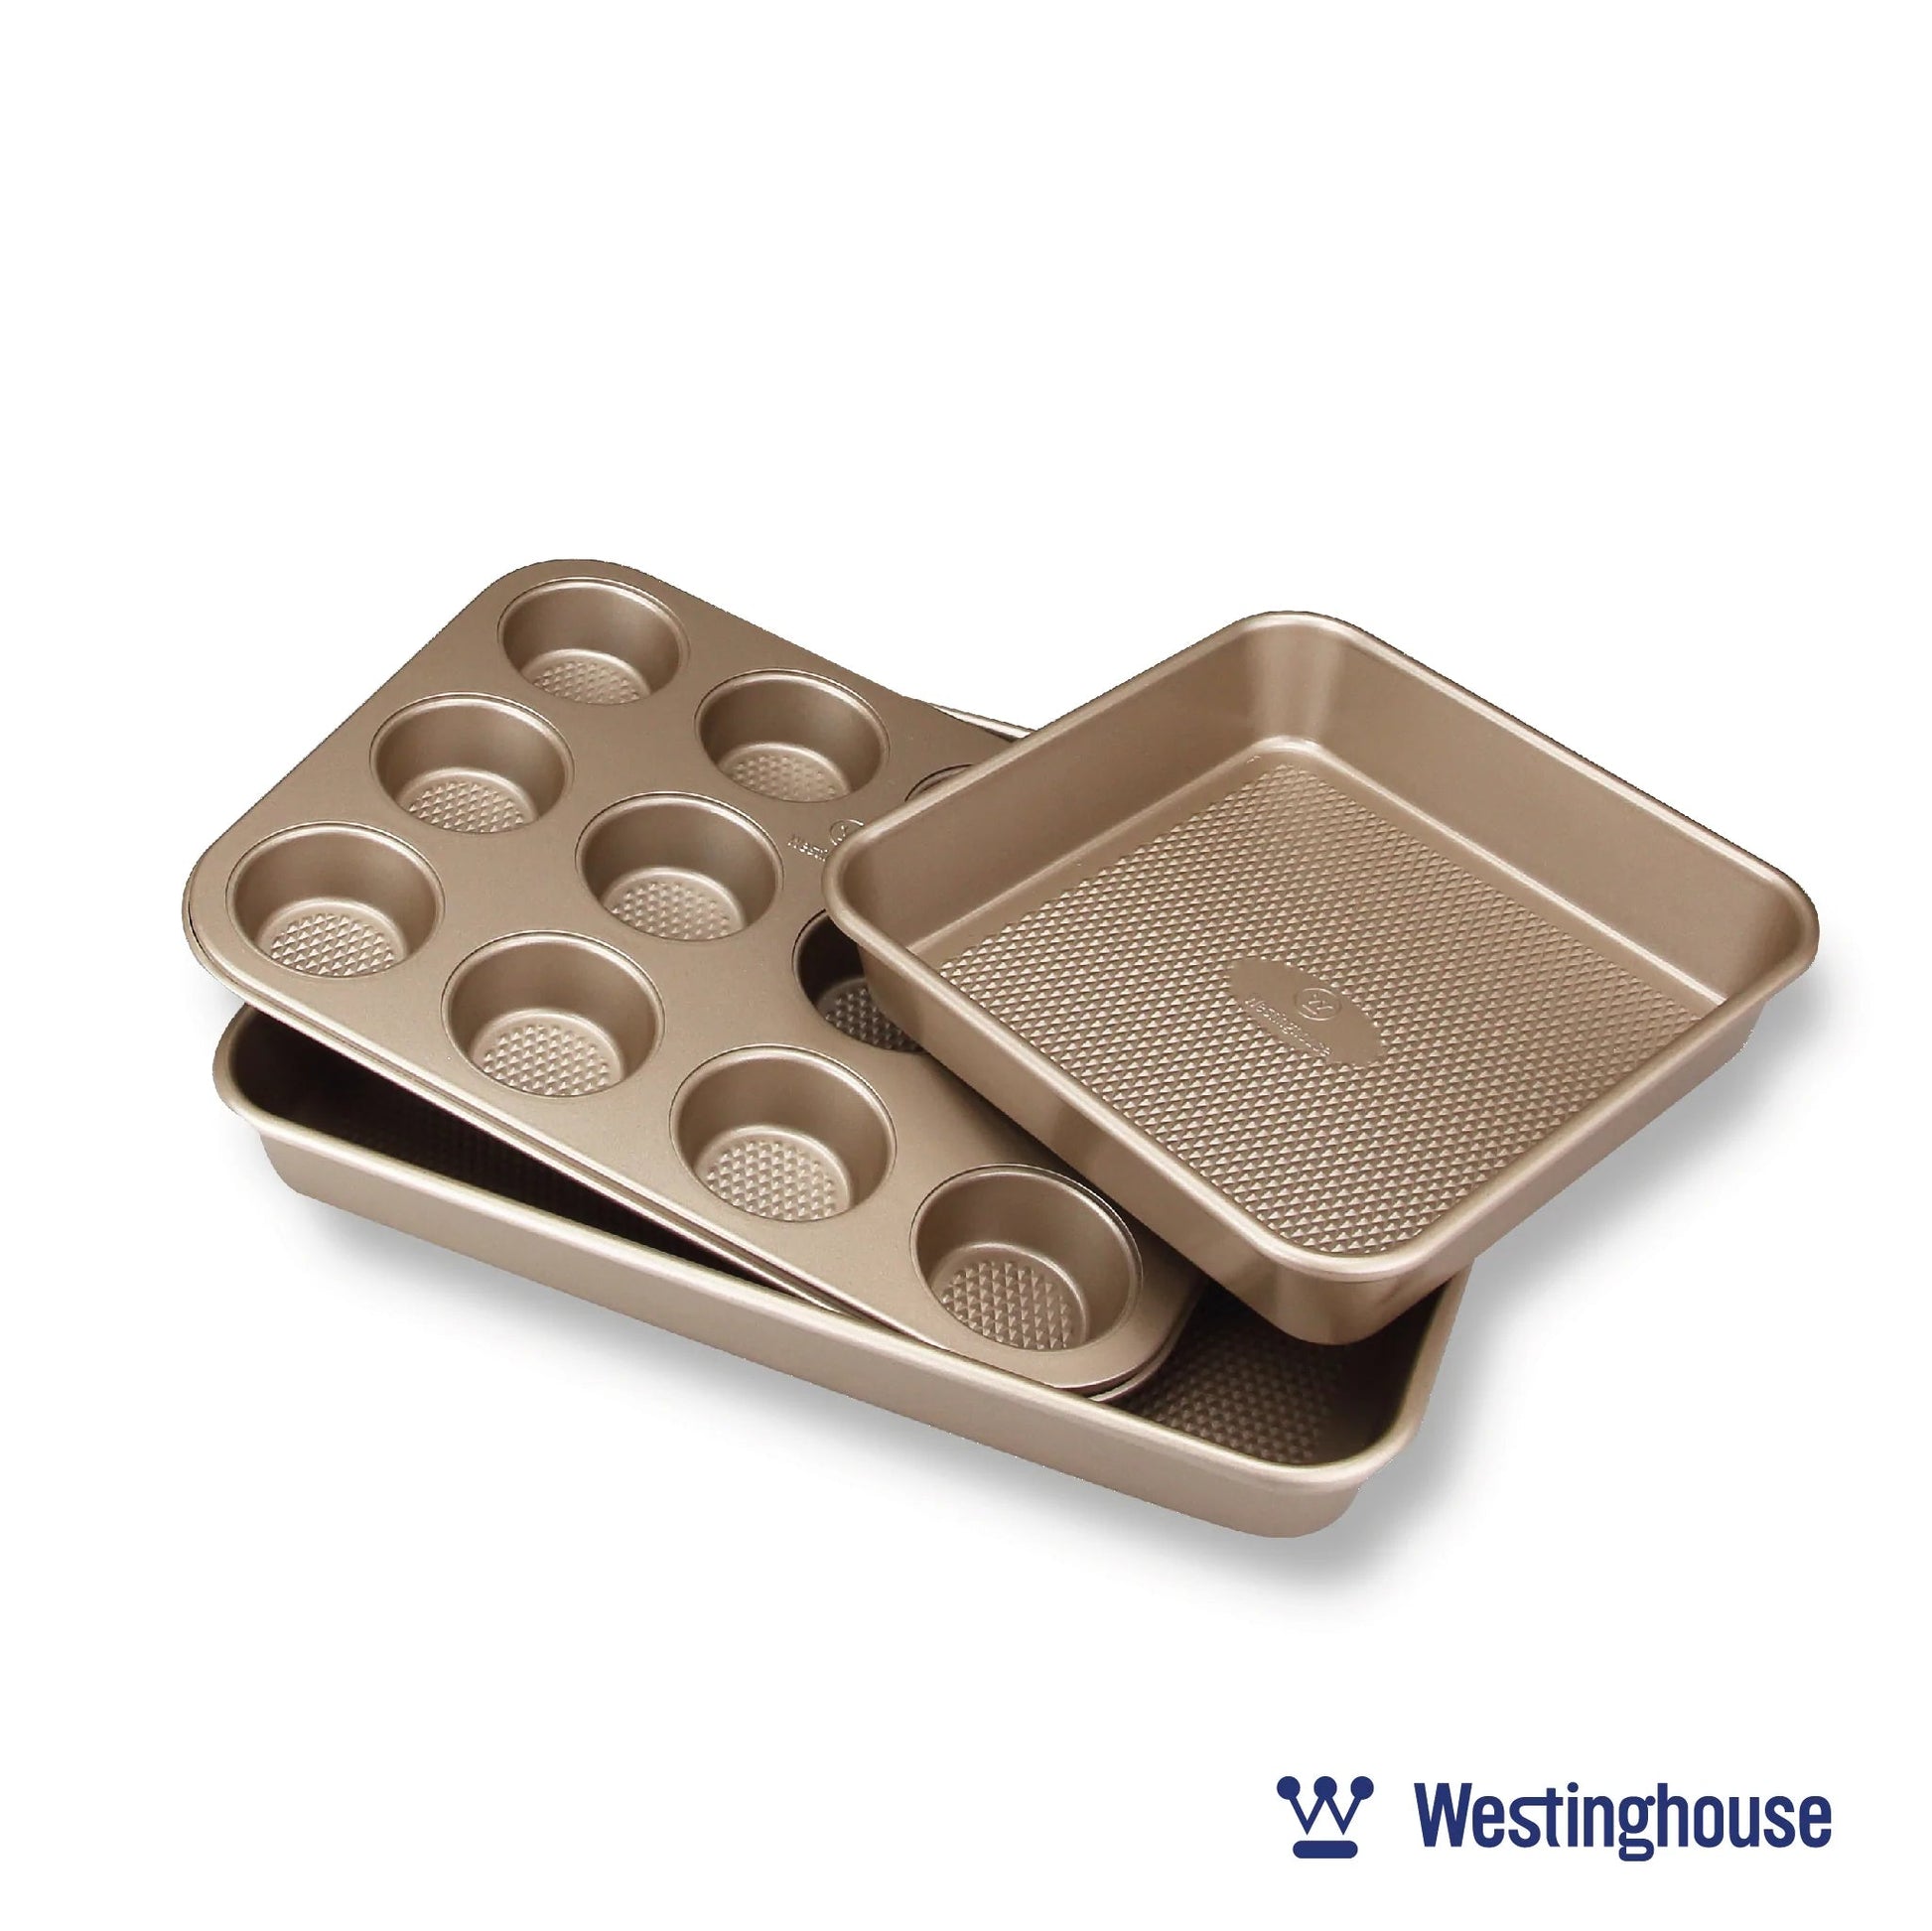 https://kitchenoasis.com/cdn/shop/files/Westinghouse-3-Piece-Carbon-Steel-Premium-Non-stick-Baking-Pan-Set-With-Square-Pan-Muffin-Tray-and-Rectangular-Deep-Tray.webp?v=1685842126&width=1946